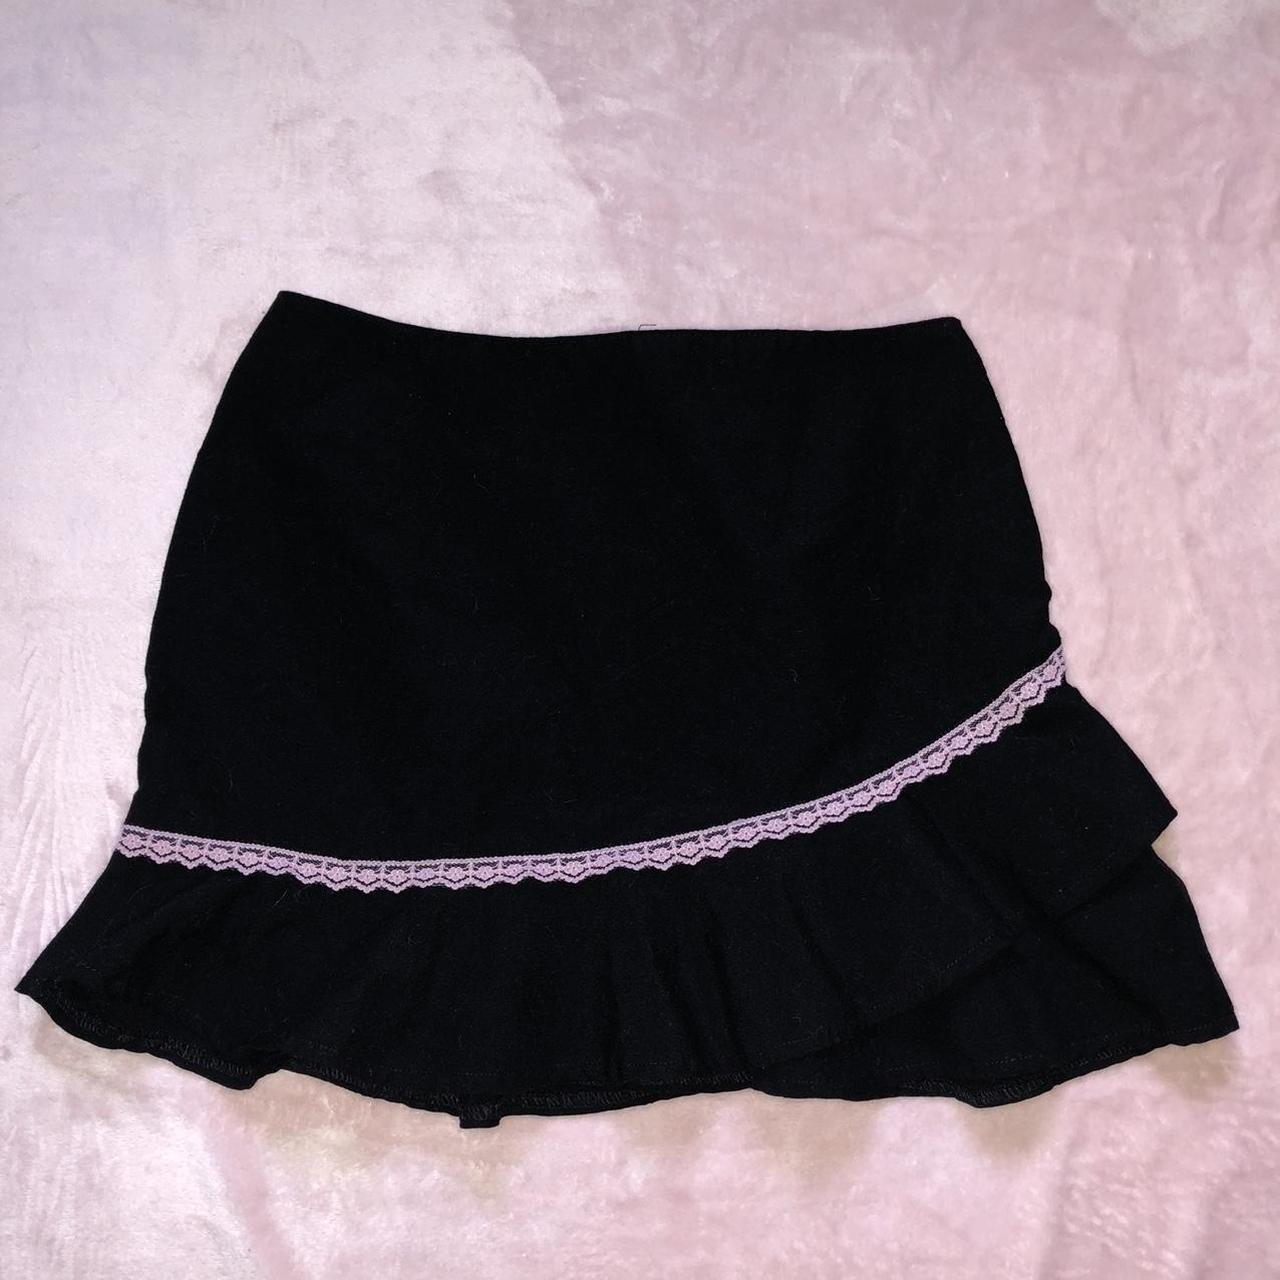 Repop; this is the cutest skirt ever, i really wish... - Depop